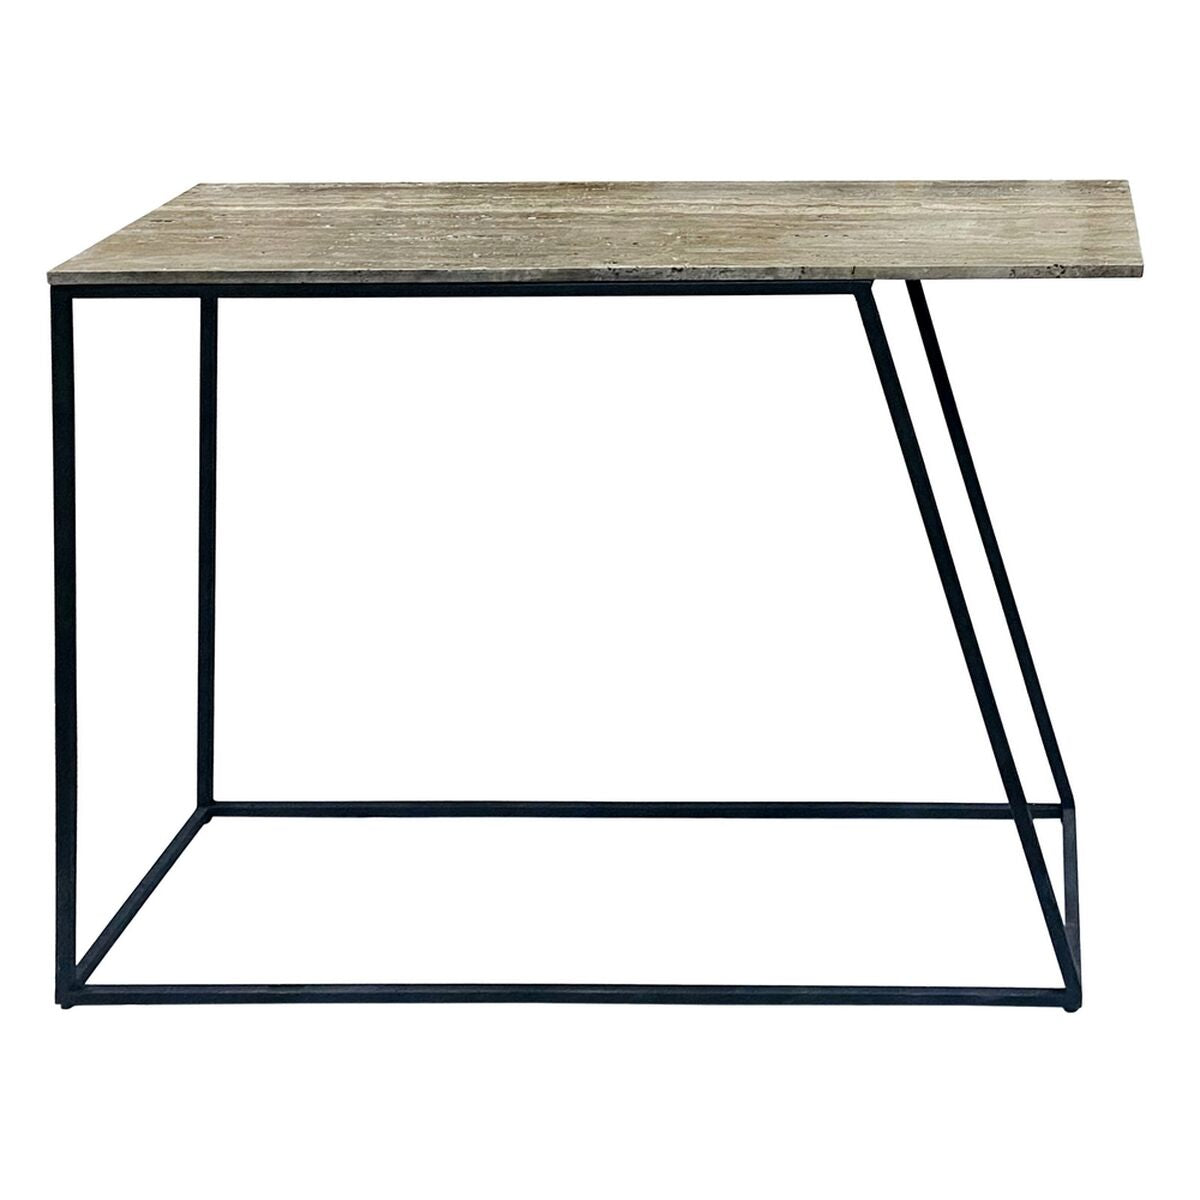 Hall Table in Marble and Black Metal (102 x 36 x 85 cm)